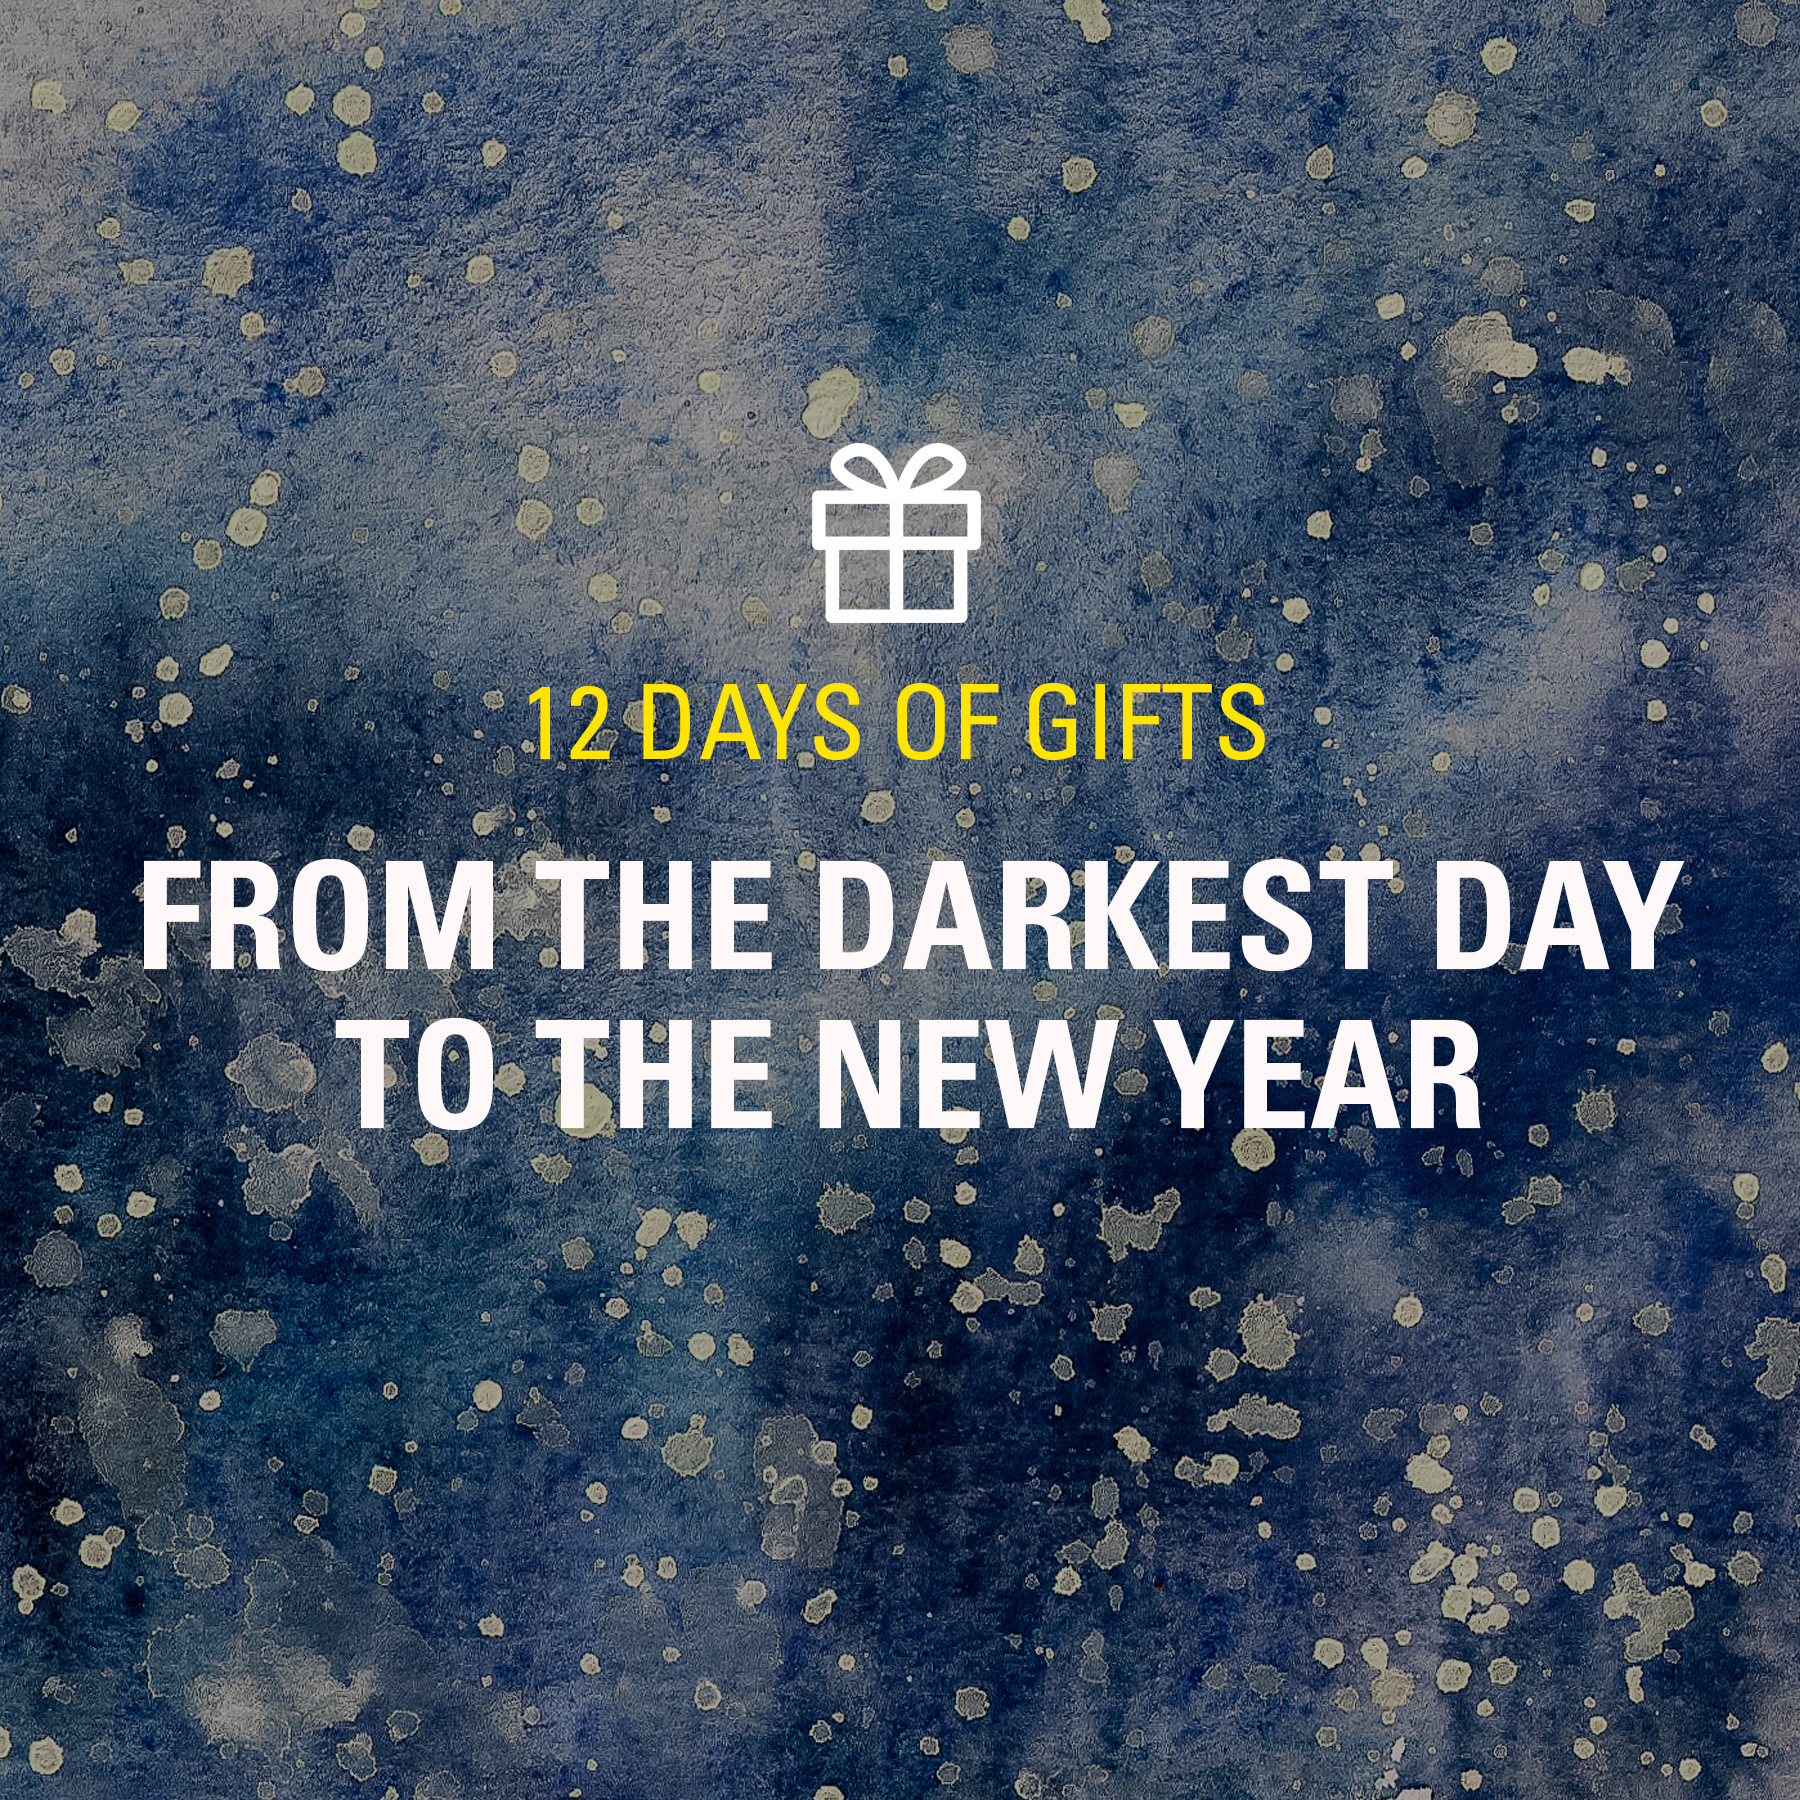 12 DAYS OF GIFTS: FROM THE DARKEST DAY TO THE NEW YEAR